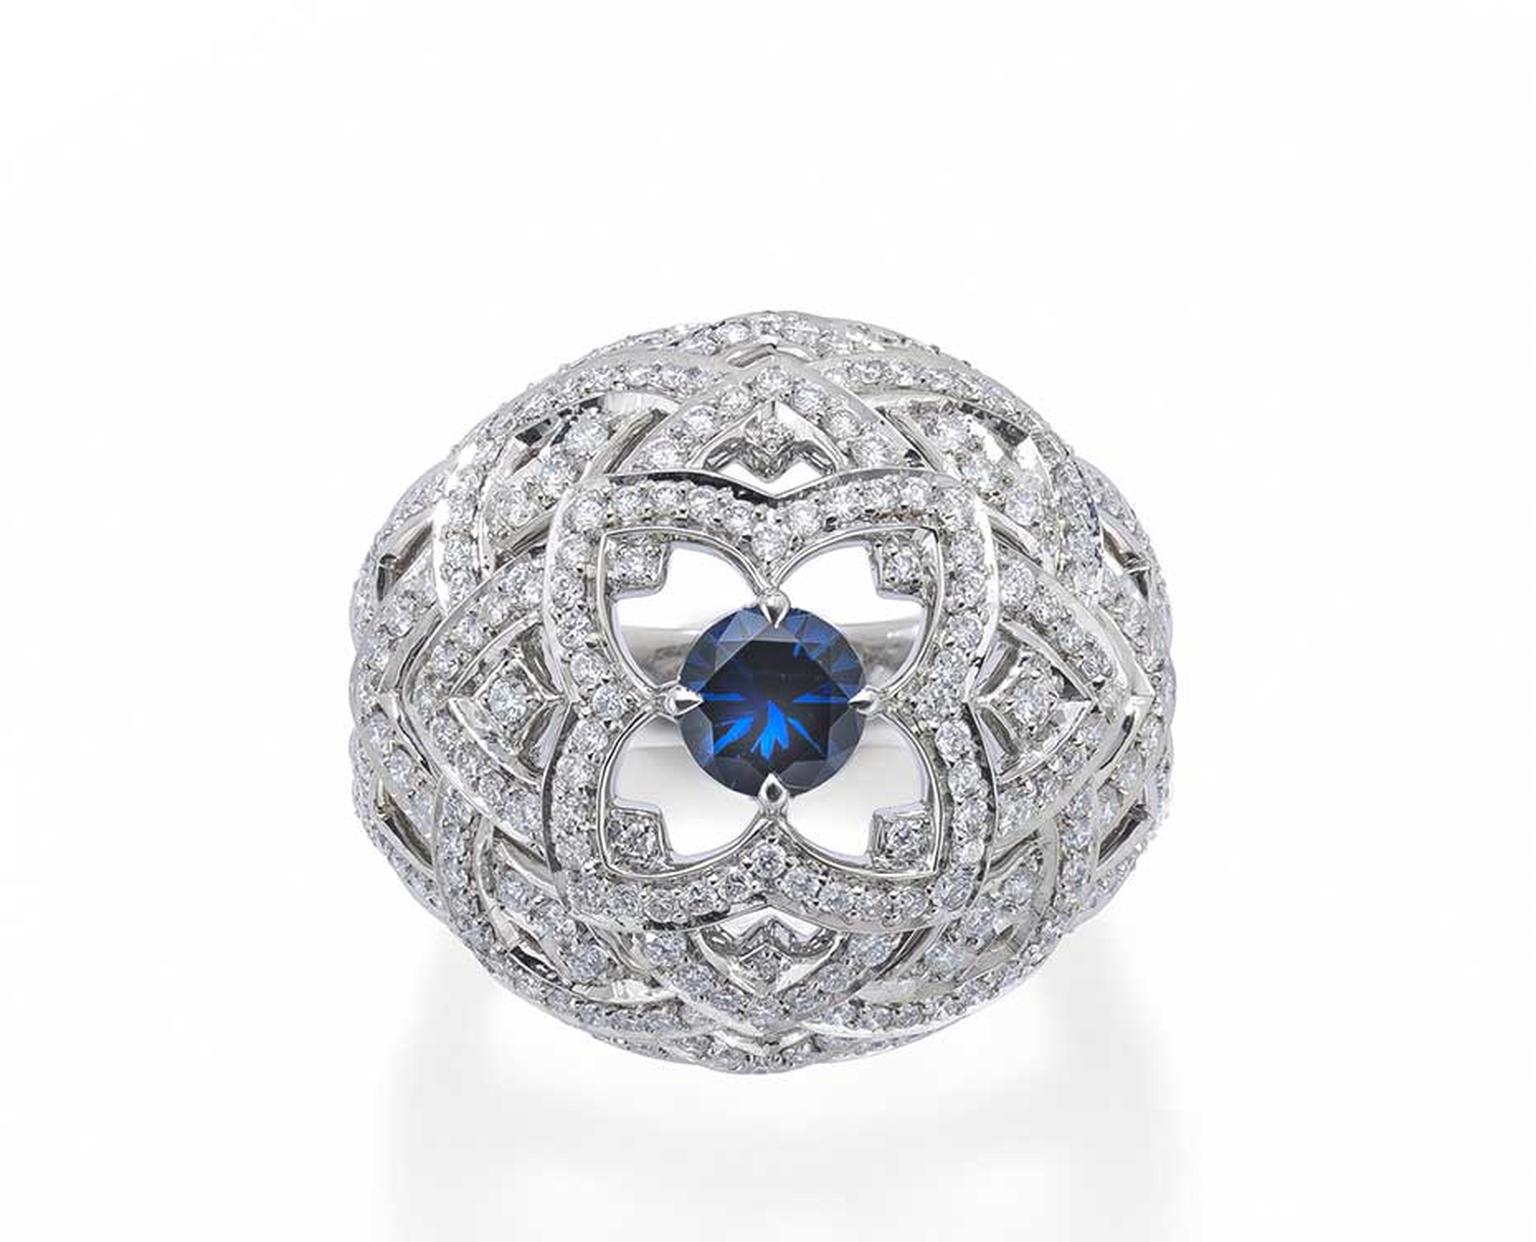 Mappin & Webb Floresco collection high jewellery ring in white gold, set with 250 diamonds and a vibrant brilliant-cut blue sapphire